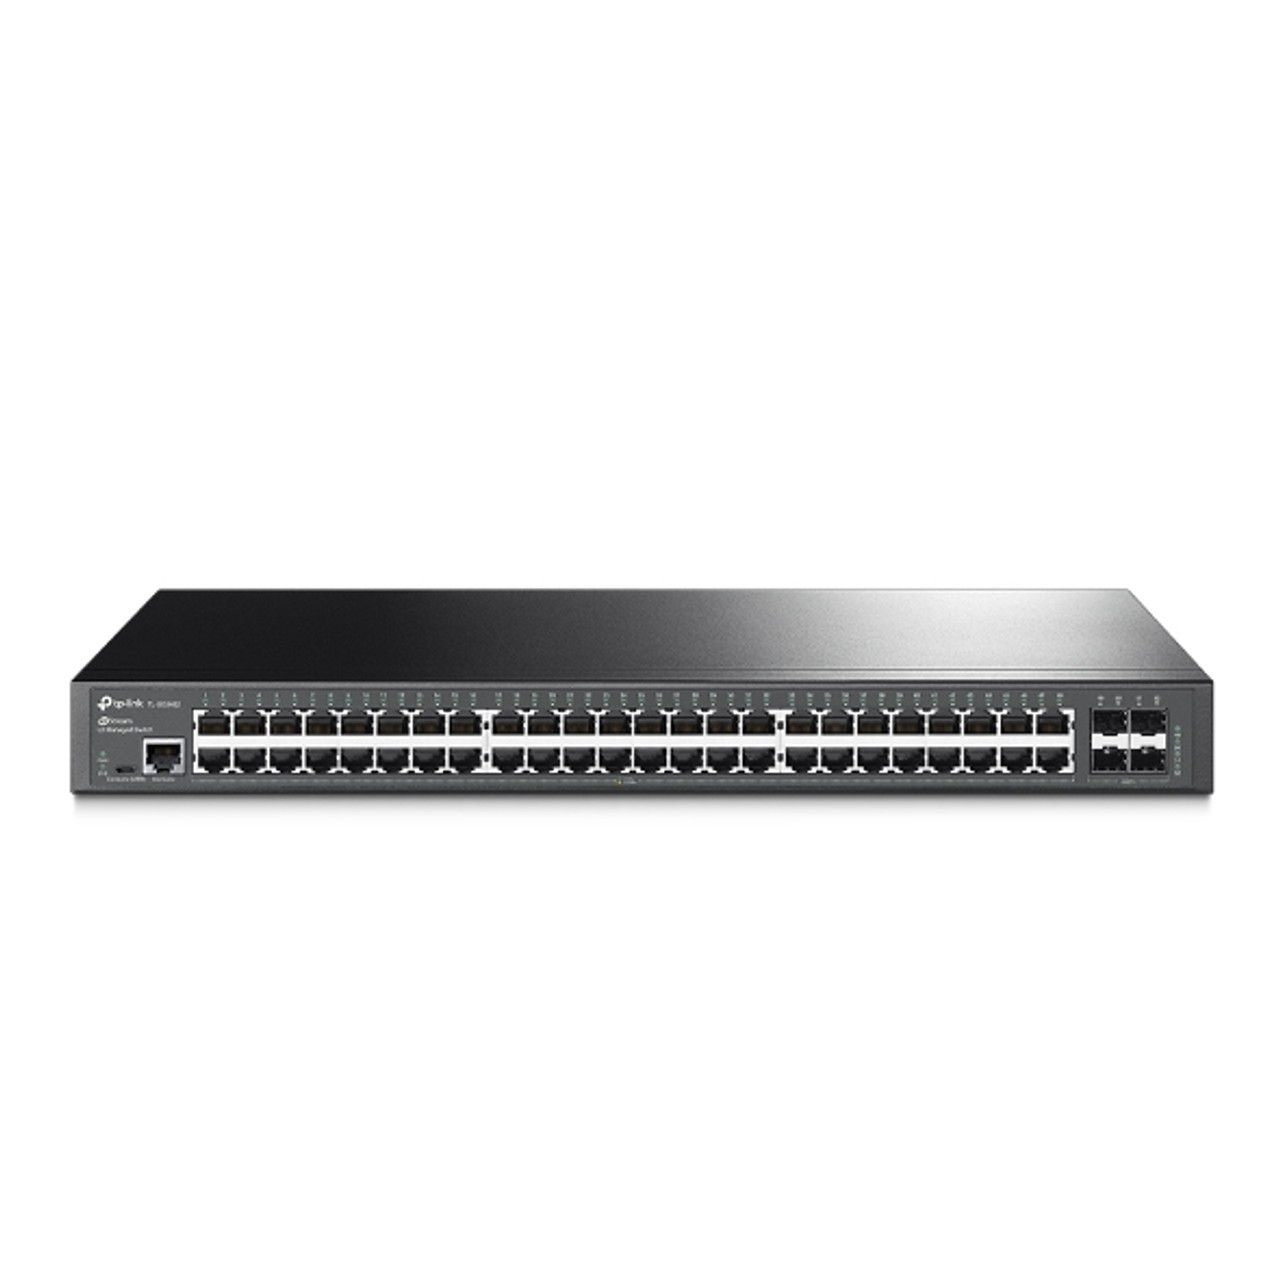 TP-LINK TL-SG3452 JetStream 48-Port Gigabit L2 Managed Switch with 4 SFP  Slots, Integrated into Omada SDN, Centralised Management, Static Routing  (L-NWTL-SG3452) shop at AUSTiC SHOP